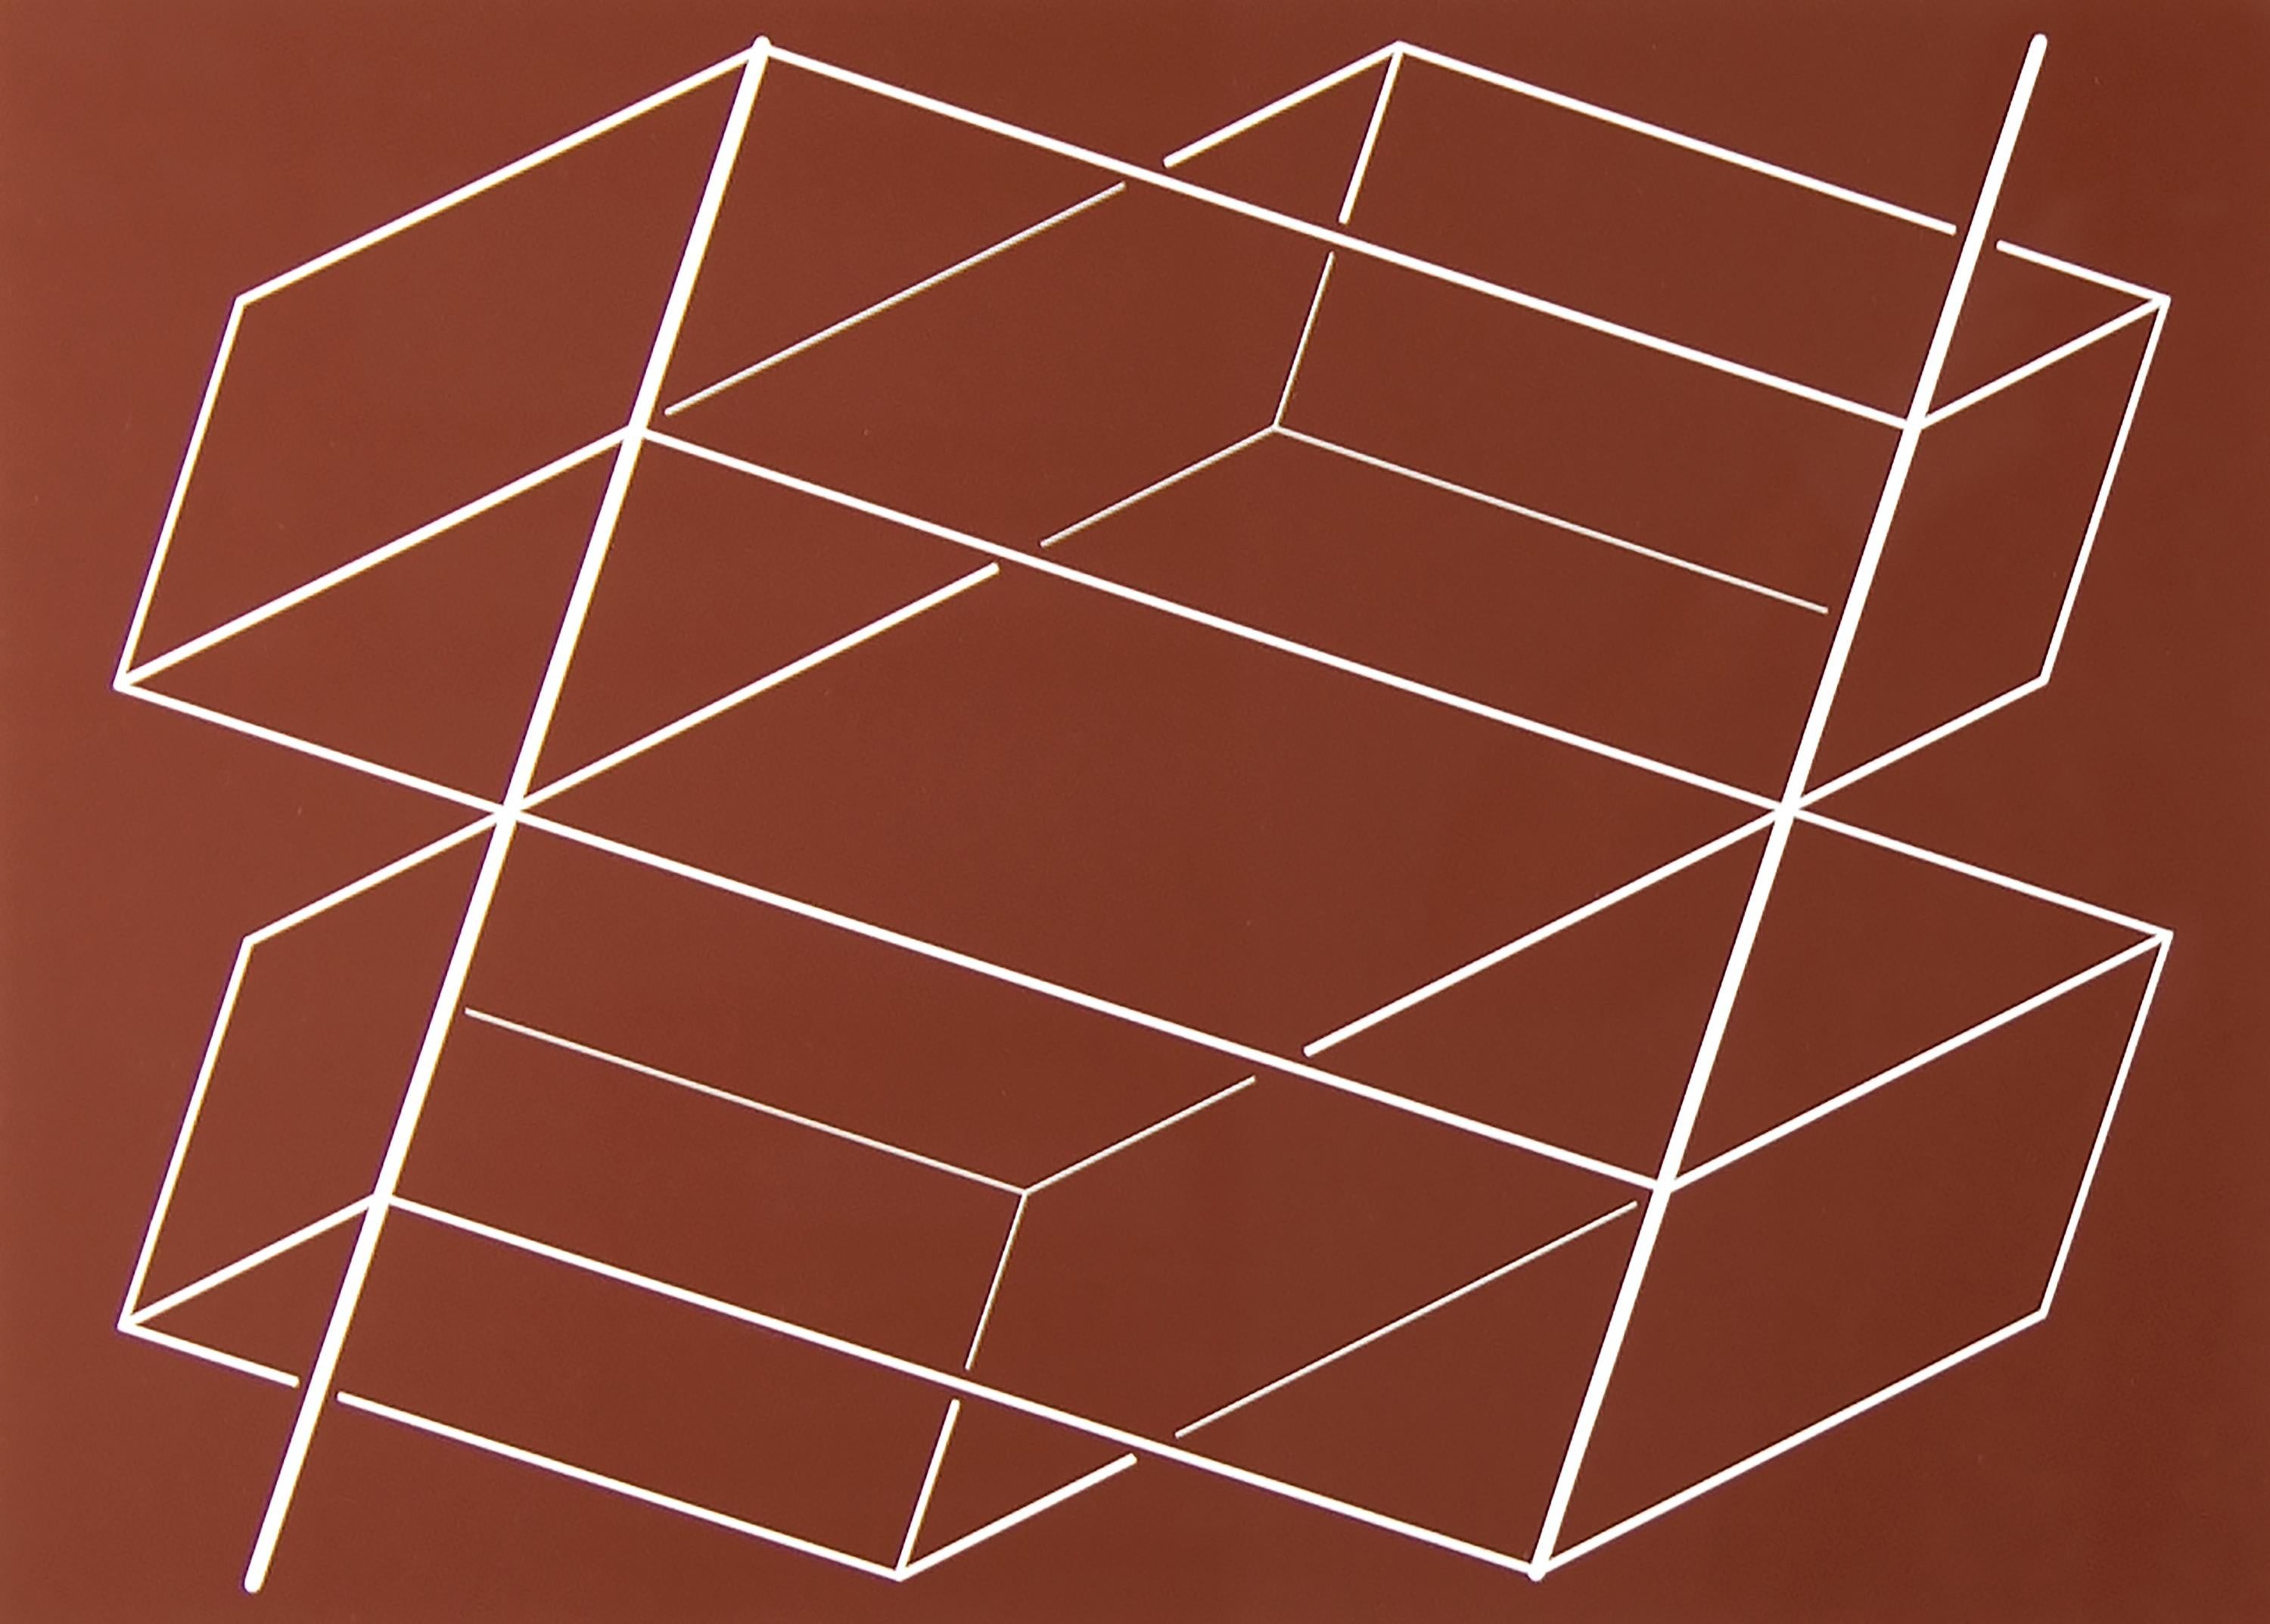 Untitled from Formulation: Articulation - Brown Abstract Print by Josef Albers